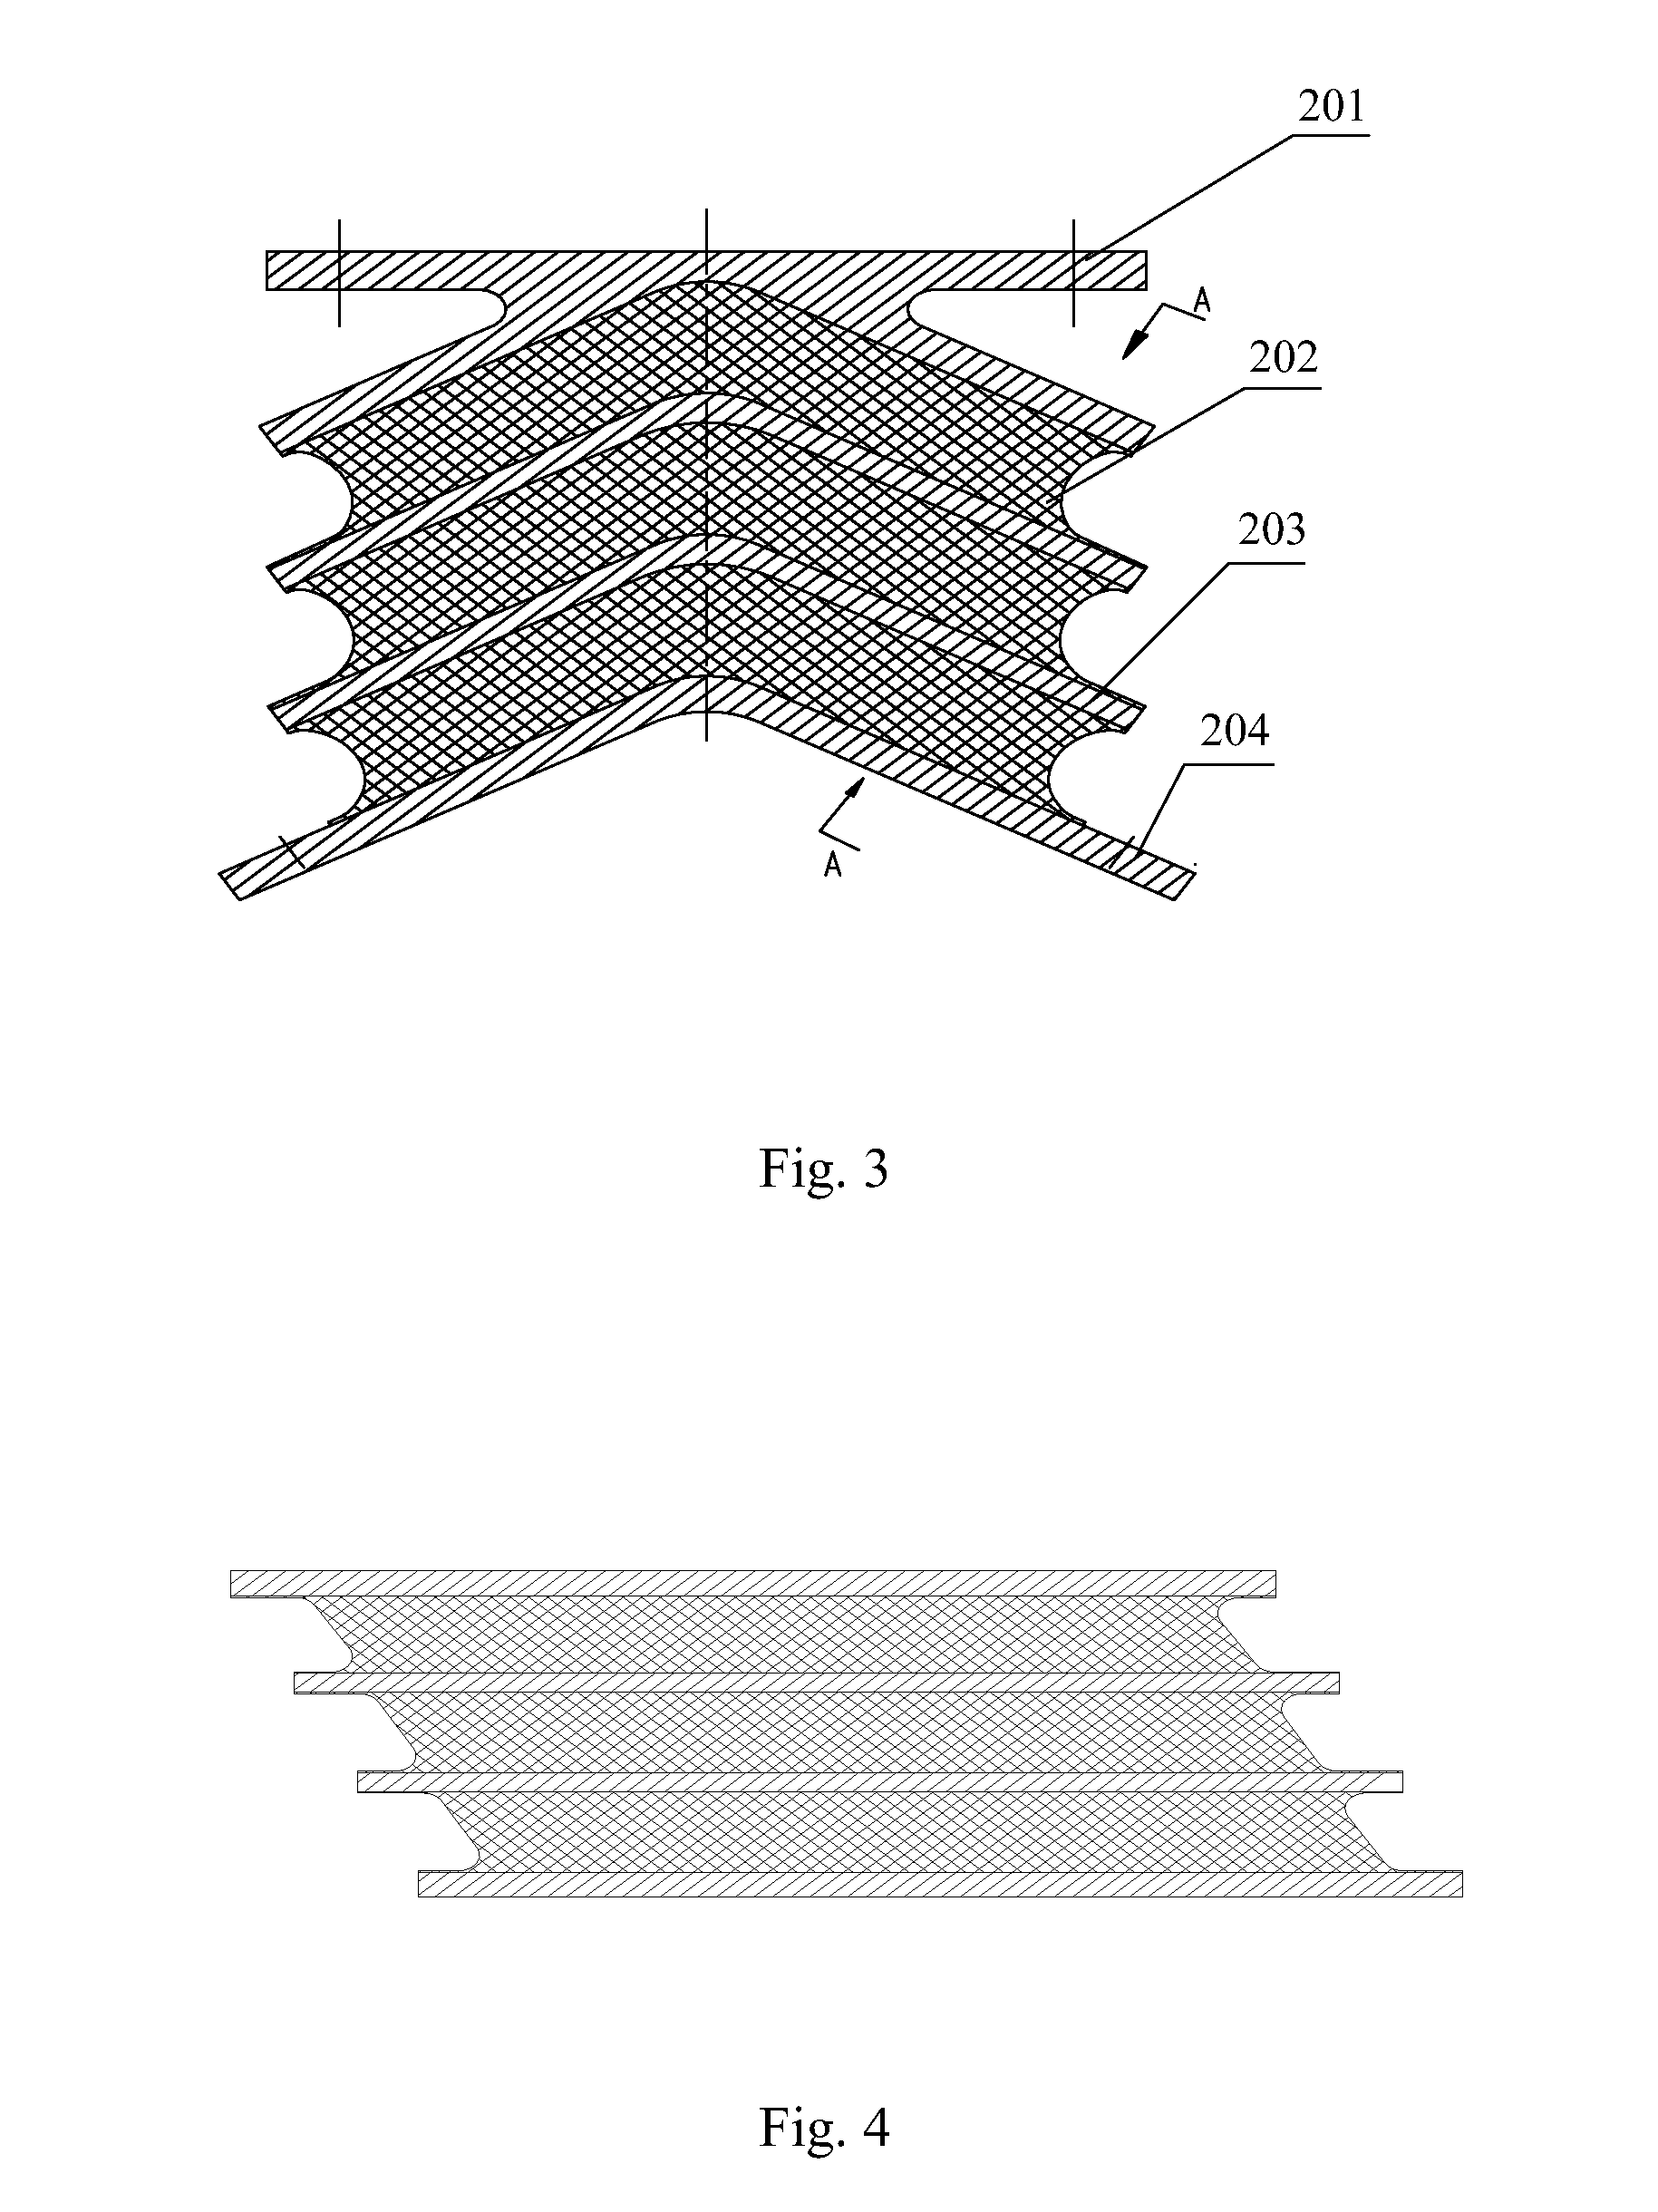 Rubber spring, rubber suspension system and truck